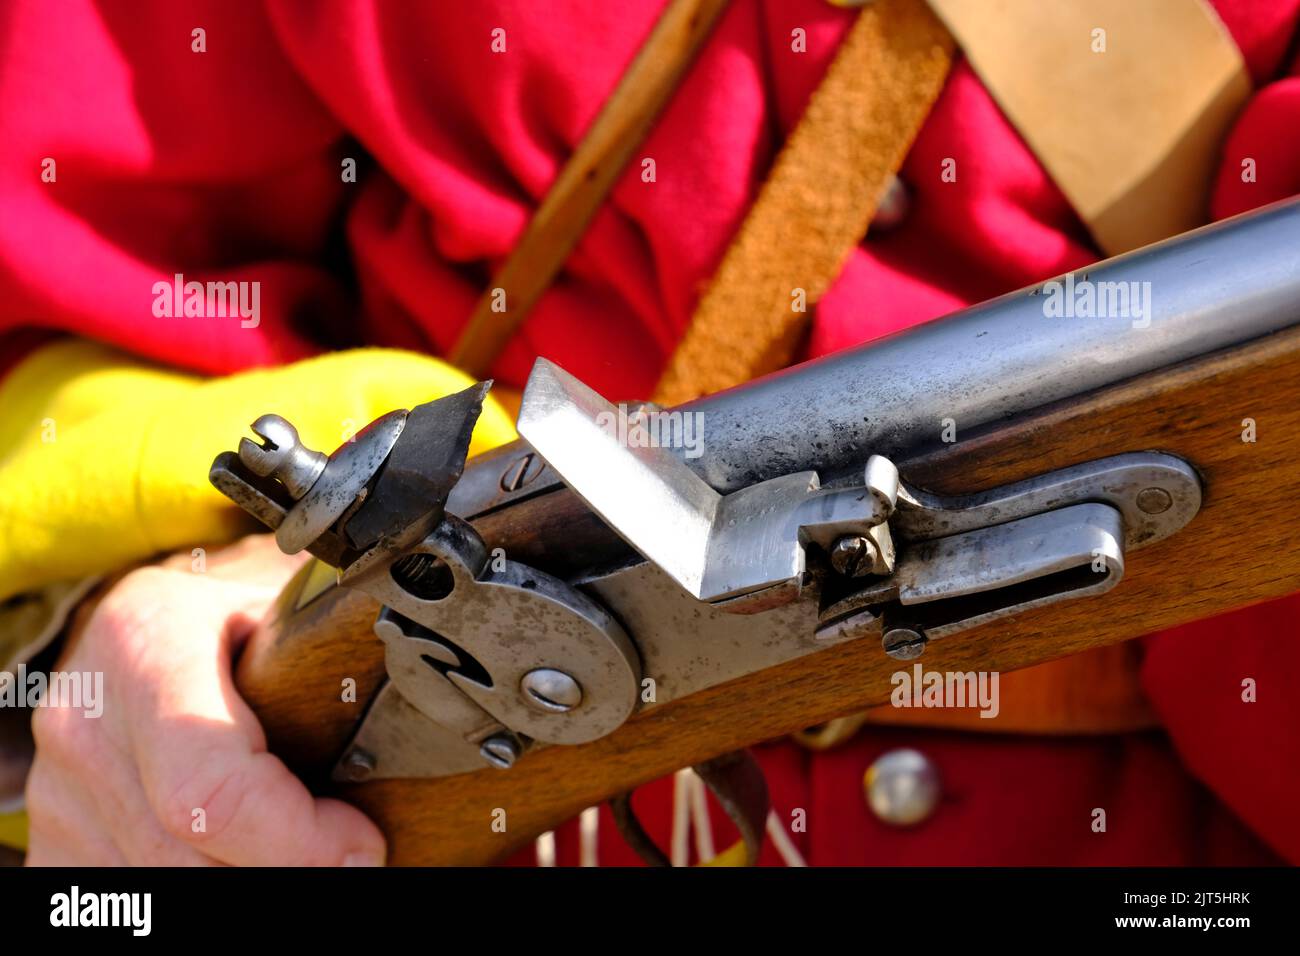 Glastonbury, UK. 28th Aug, 2020. Members of the Taunton Garrison re-enact the 1785 Monmouth Rebellion at Glastonbury Abbey. Taunton Garrison are enthusiasts who provide living history and military demonstrations. An authentic flintlok. Credit: JMF News/ Alamy Live News Stock Photo